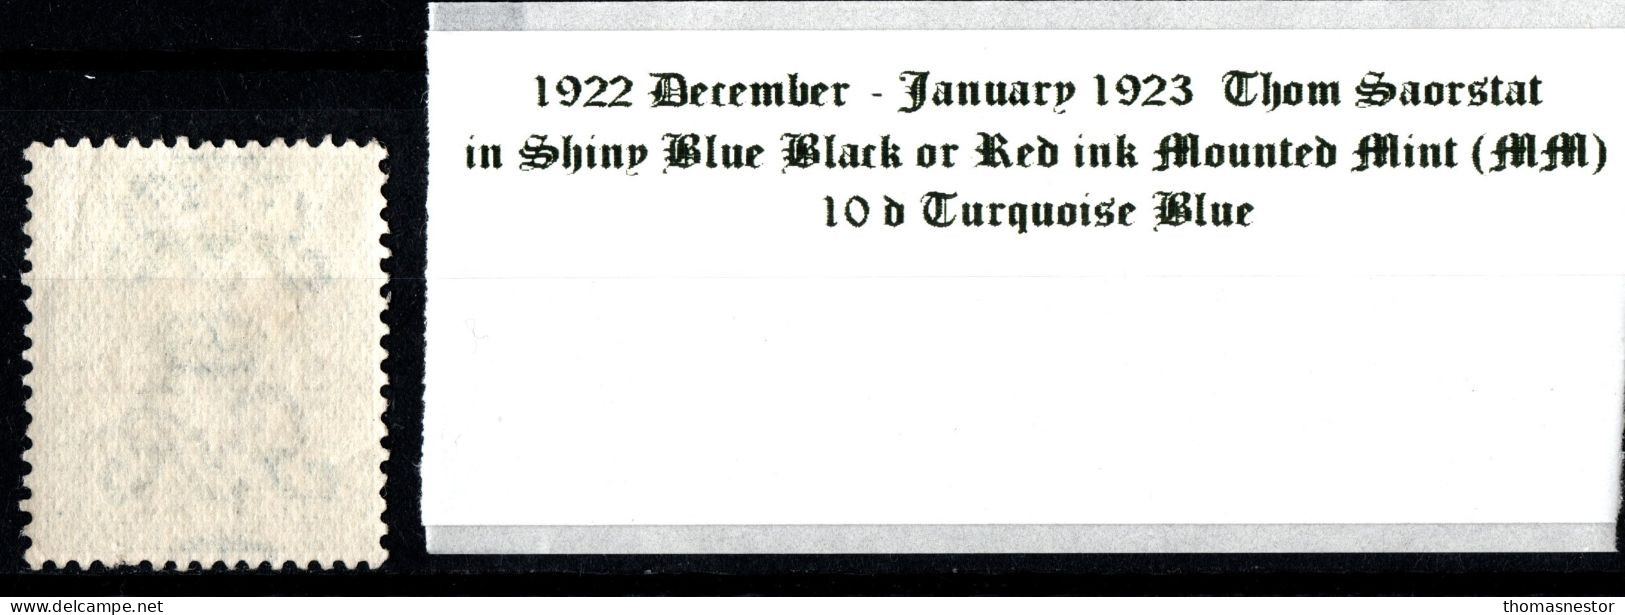 1922 - 1923 December-January Thom Saorstát In Shiny Blue Black Or Red Ink, 10 D Turquoise Blue, Mounted Mint (MM) - Unused Stamps